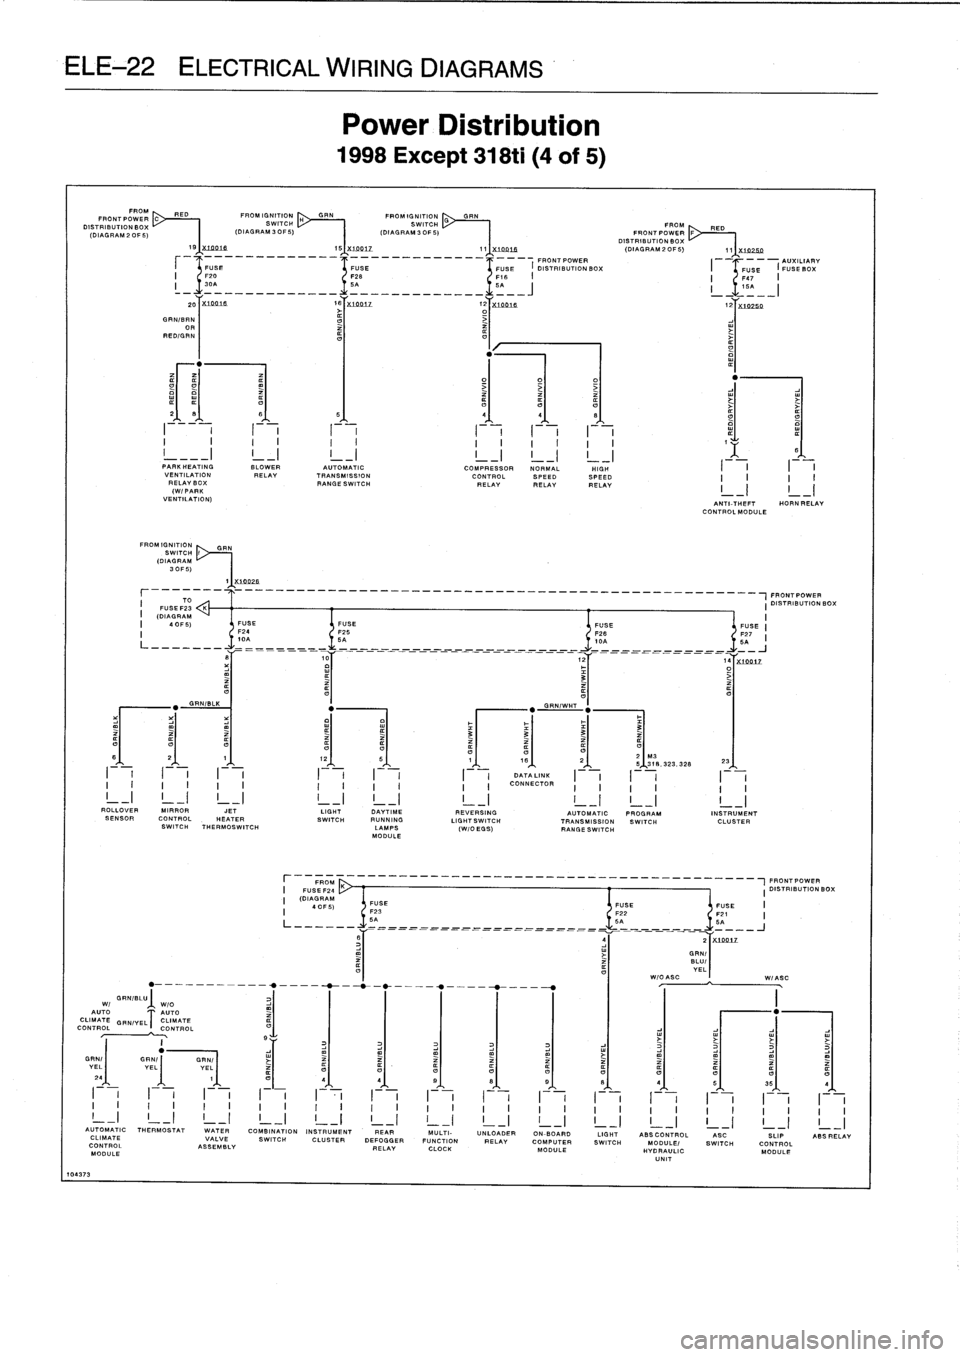 BMW M3 1994 E36 Service Manual 
ELE-22

ELECTRICAL
WIRING
DIAGRAMS

GRNIBLU
Wl

WIO

AUTO

AUTO

CLIMATE

GEN/YELT
CLIMATE

CONTROL

CONTROL

10437
3

FP

OM~
	

PED
FRONTPOWER
DISTRIBUTION

BOY%

(DIAGRAM

2
OF
5)

S

FROMIGNITION